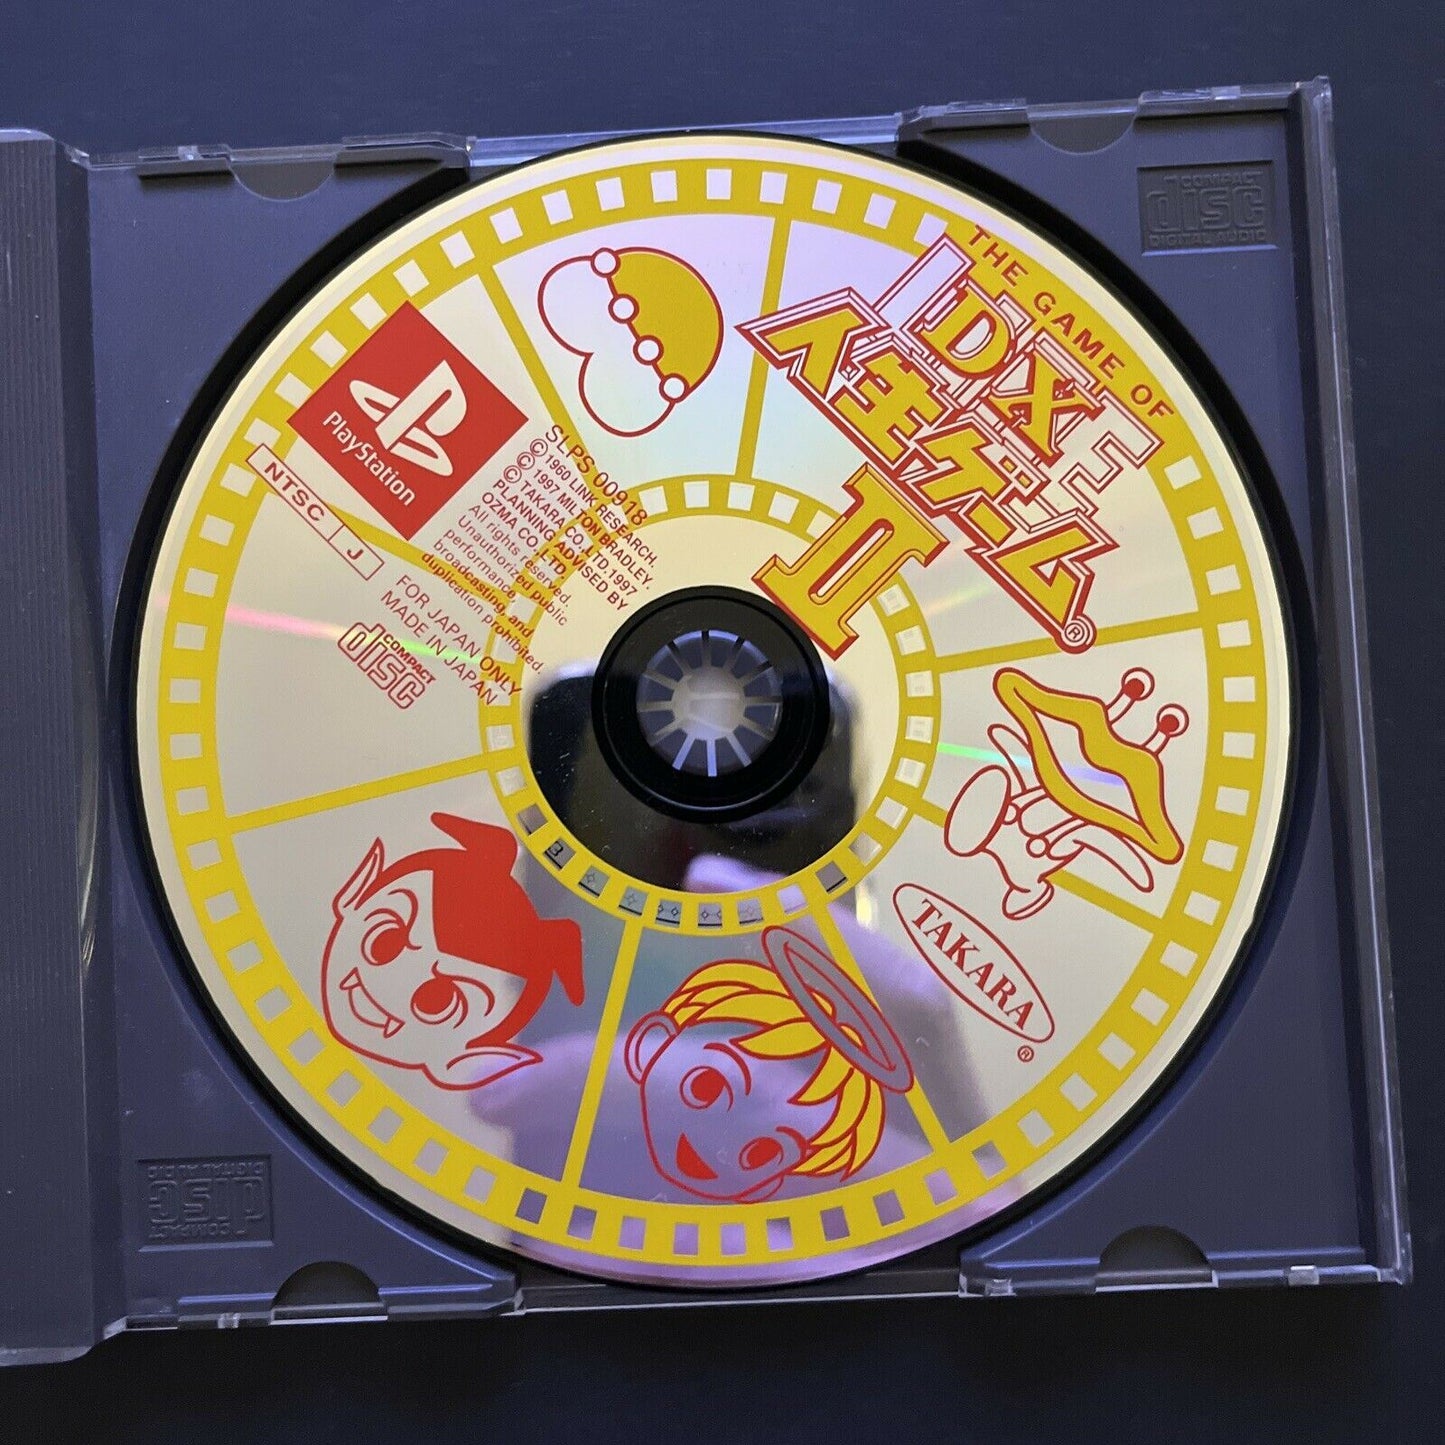 DX Jinsei Game II: The Game of Life - Sony PlayStation 1 PS1 NTSC-J JAPAN Game